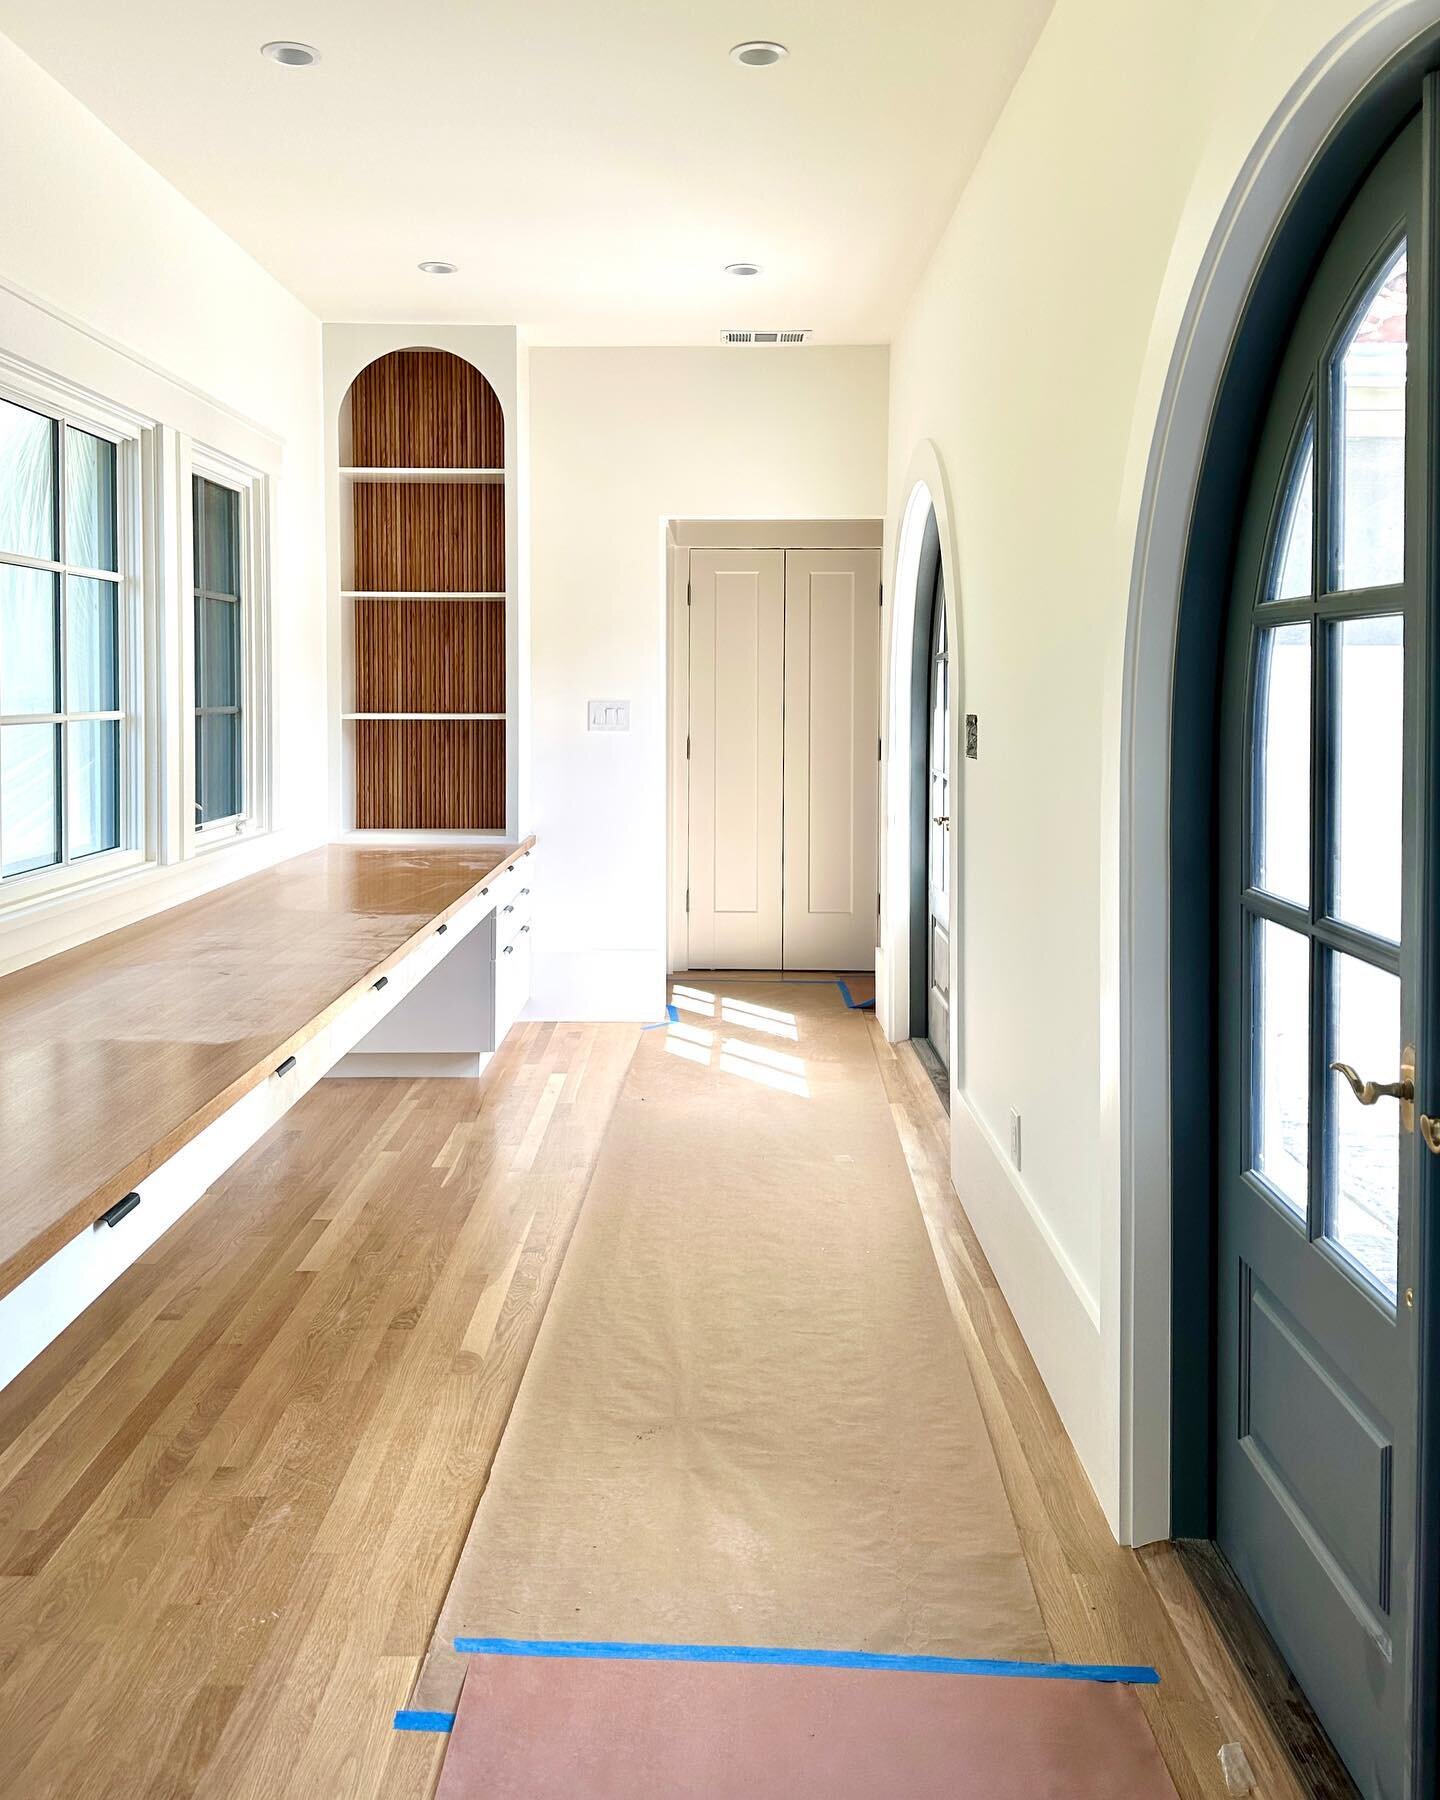 We are nearing completion of a second story addition to this spanish style home built in 1900s featuring a breathtaking rooftop deck. Check out our stories for more pictures. #ninajizhardesign 

#historichomes #spanishstylehome #archlovers #archdoors